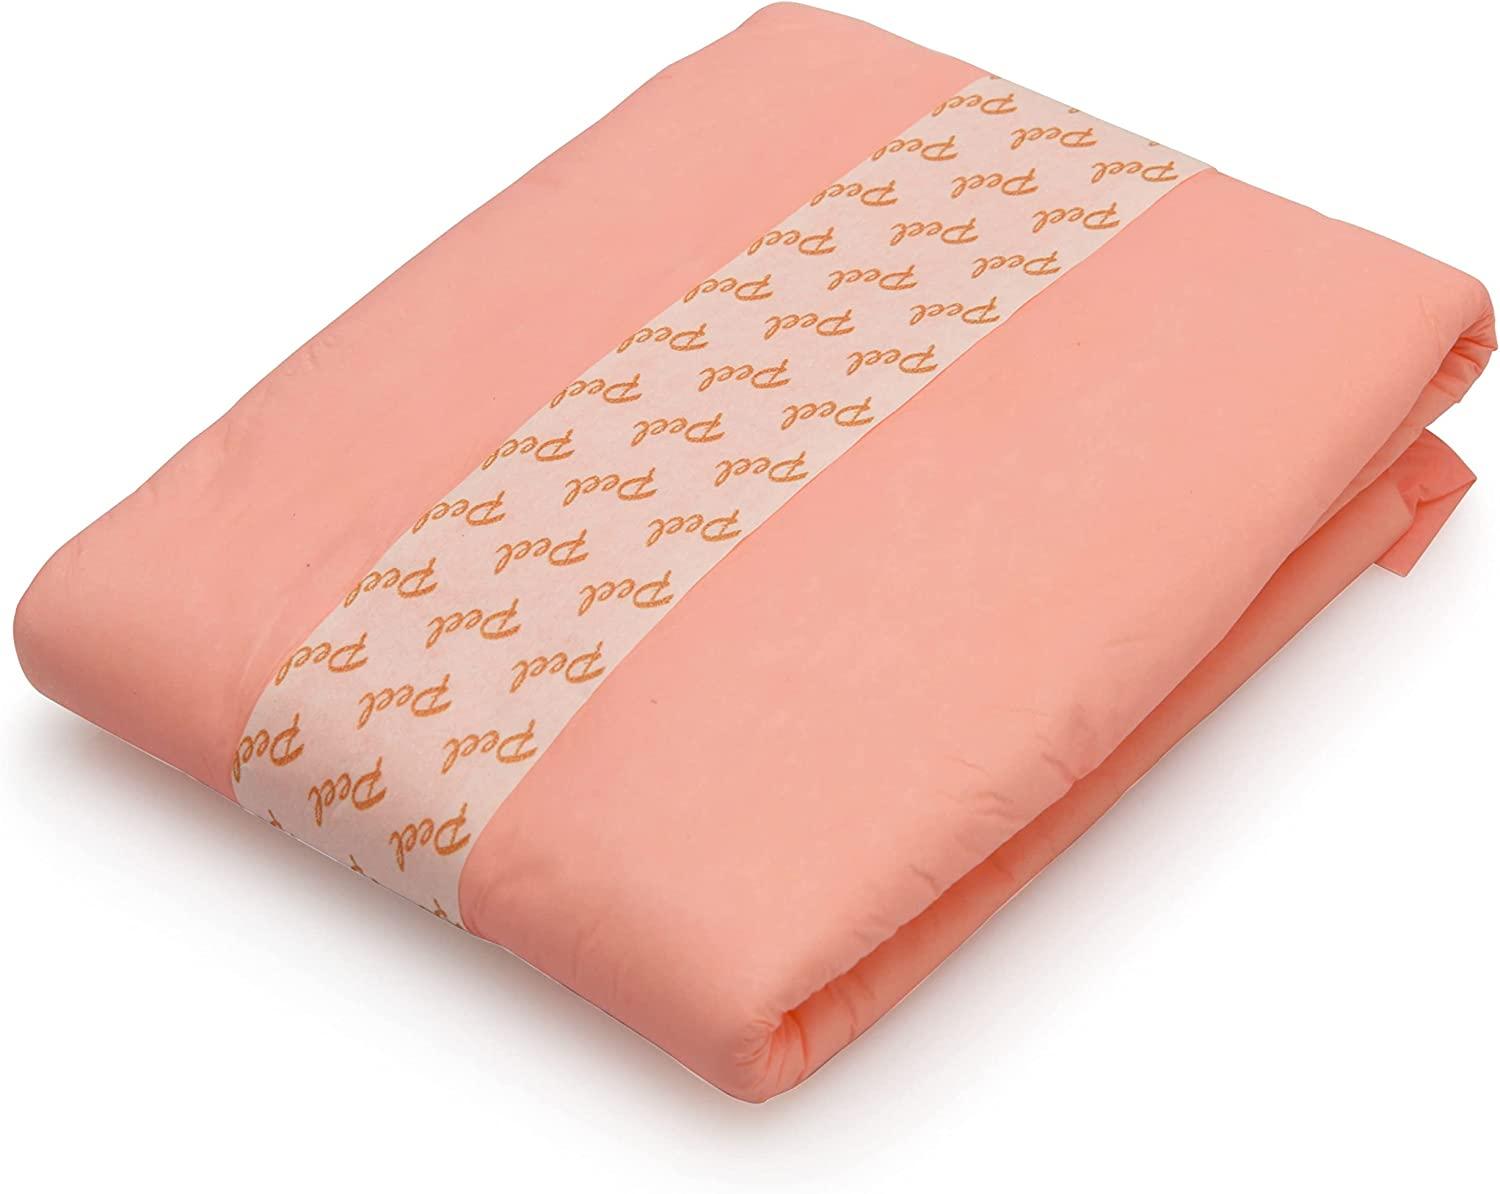 NEW UNBRANDED ADULT SIZE HIGH ABSORBENCY PEE PADS BED LINER PEACH COLOR 60  PADS